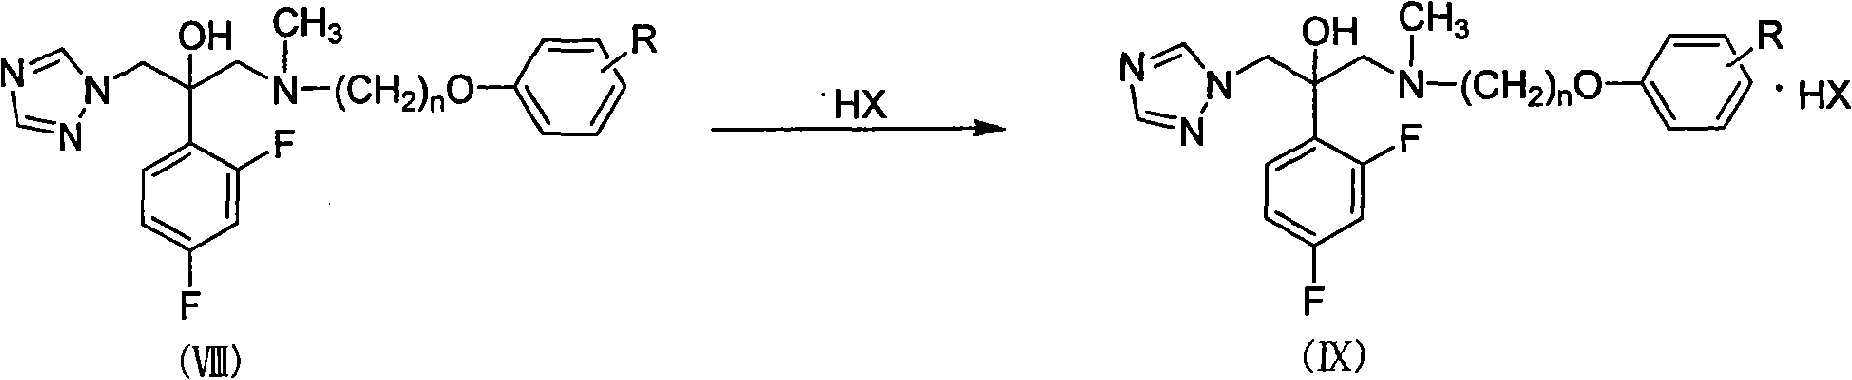 Substituted phenoxy oxygen alkylamine triazole alcohol antimycotic compounds and method of preparing the same